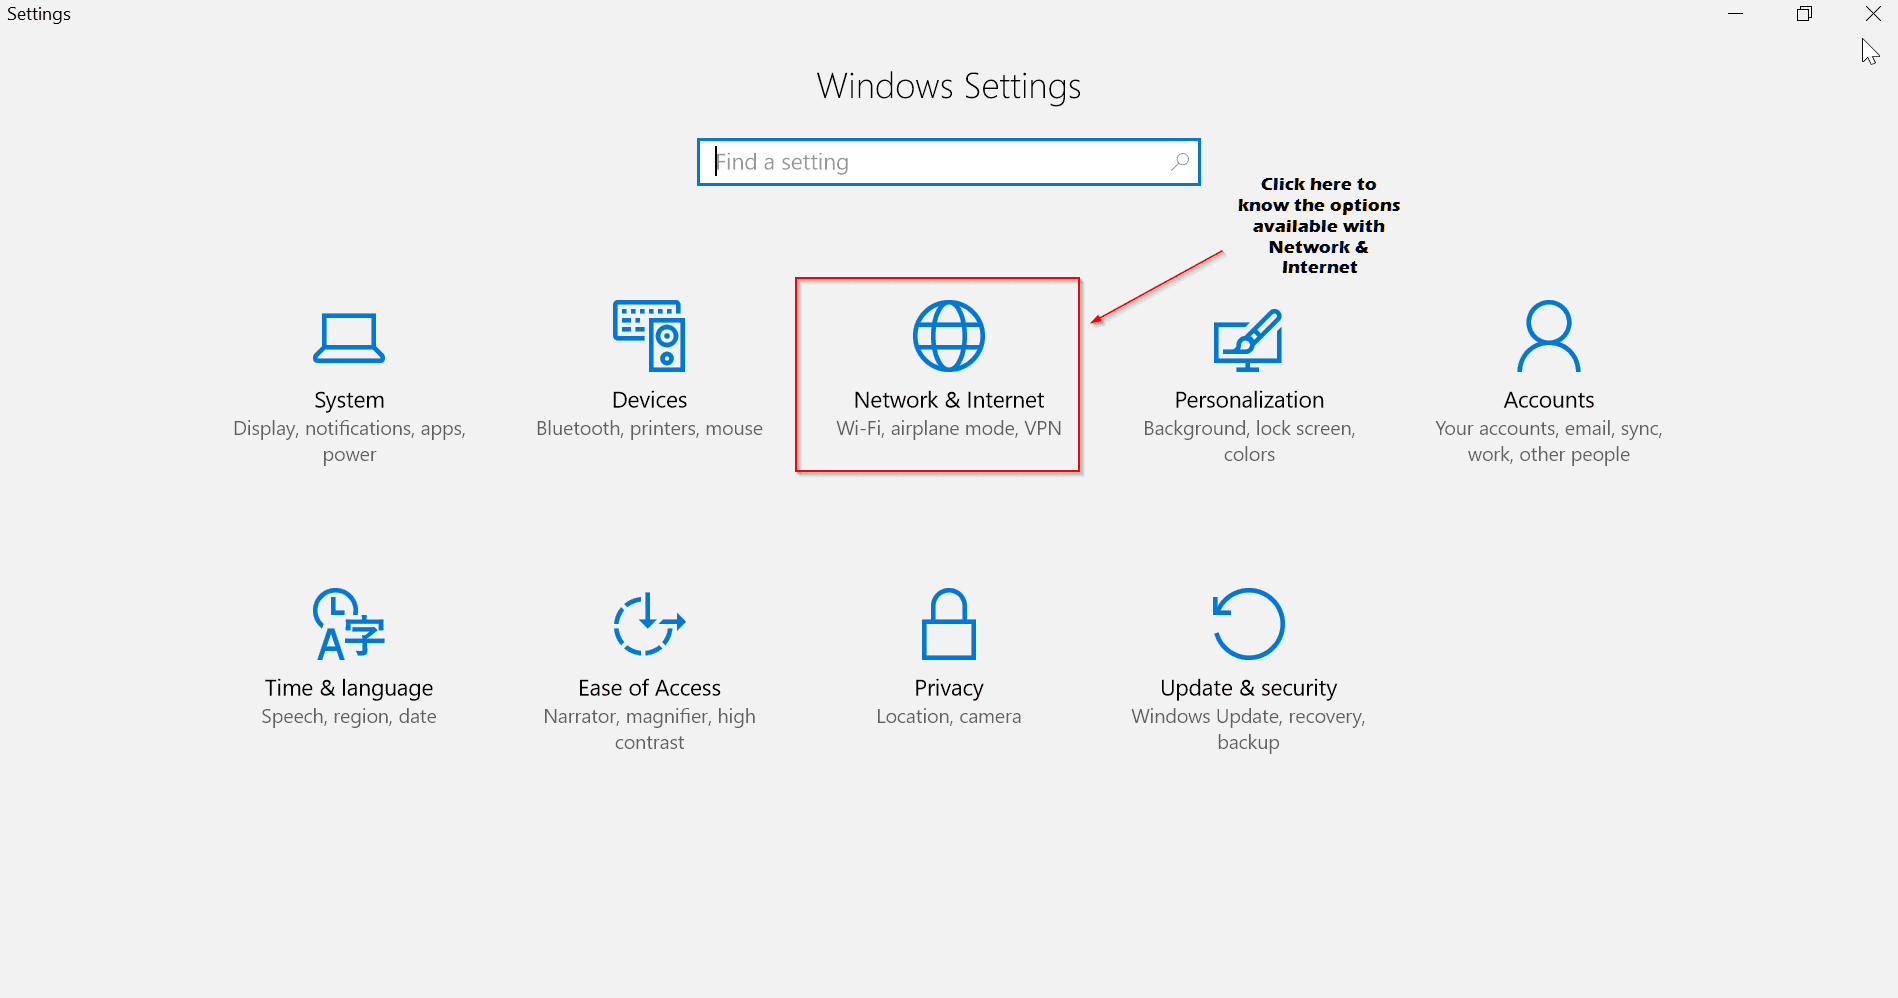 [Guide]– Network as well as Internet Settings in Windows 10– Explanation of Each Option